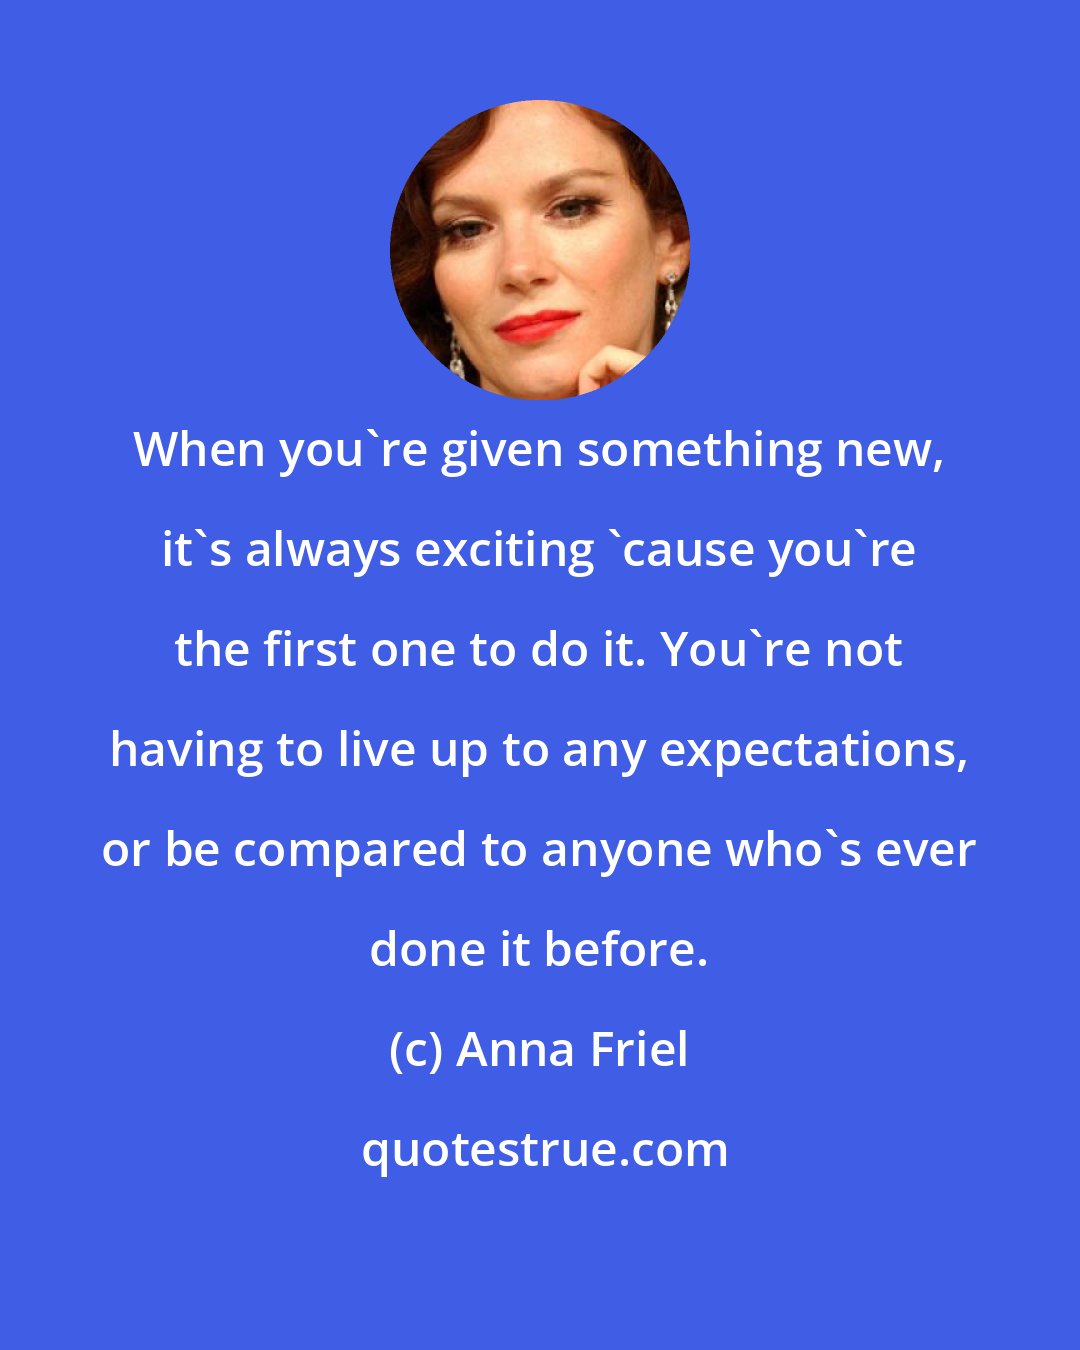 Anna Friel: When you're given something new, it's always exciting 'cause you're the first one to do it. You're not having to live up to any expectations, or be compared to anyone who's ever done it before.